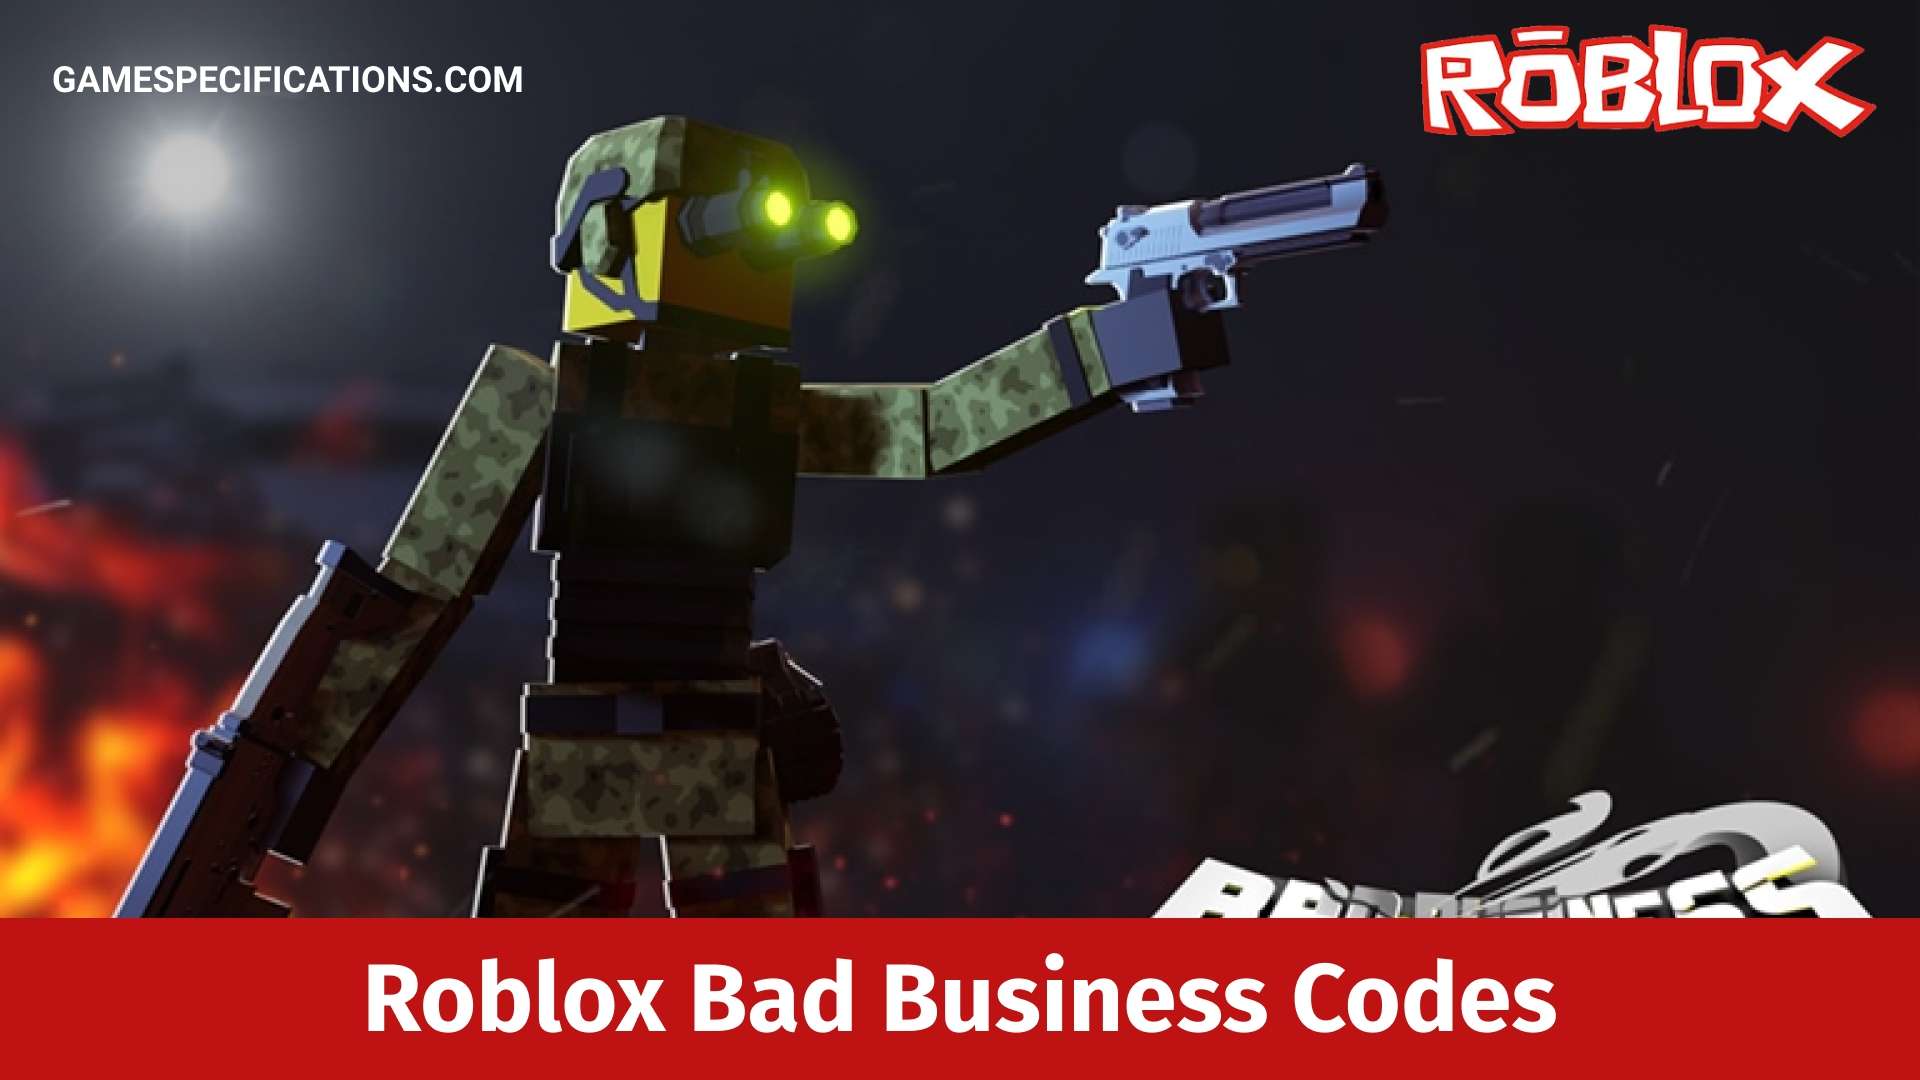 Roblox Bad Business Codes July 2021 Game Specifications - roblox first person game similar to overwatch